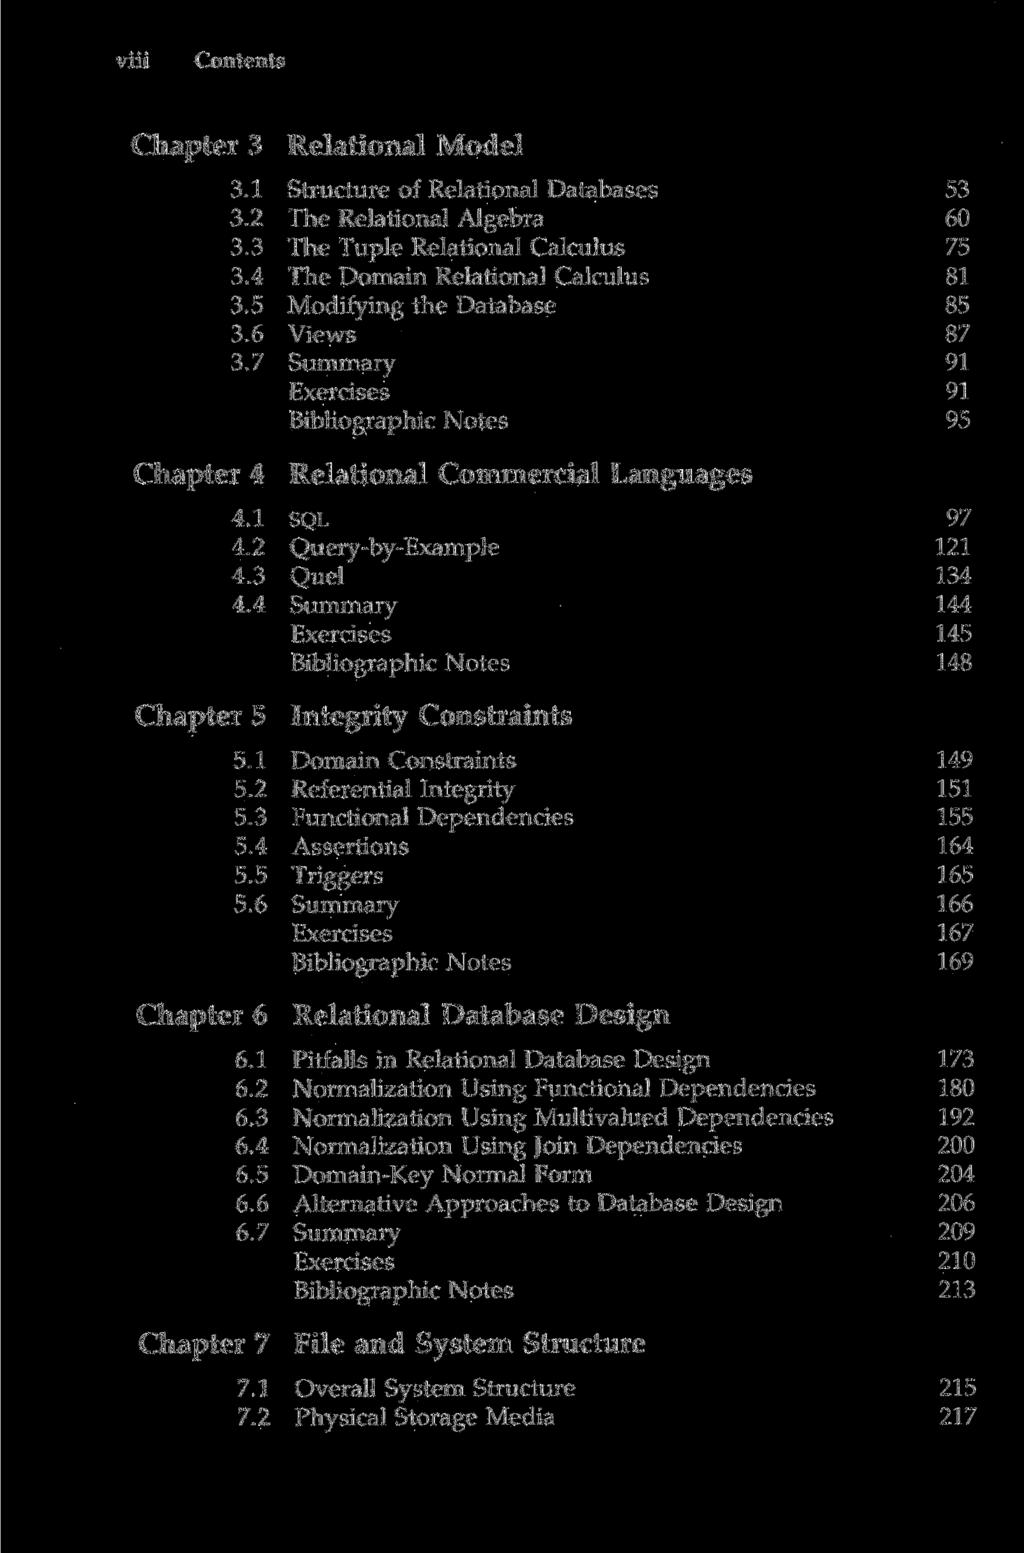 viii Contents Chapter 3 Relational Model 3.1 Structure of Relational Databases 53 3.2 The Relational Algebra 60 3.3 The Tuple Relational Calculus 75 3.4 The Domain Relational Calculus 81 3.